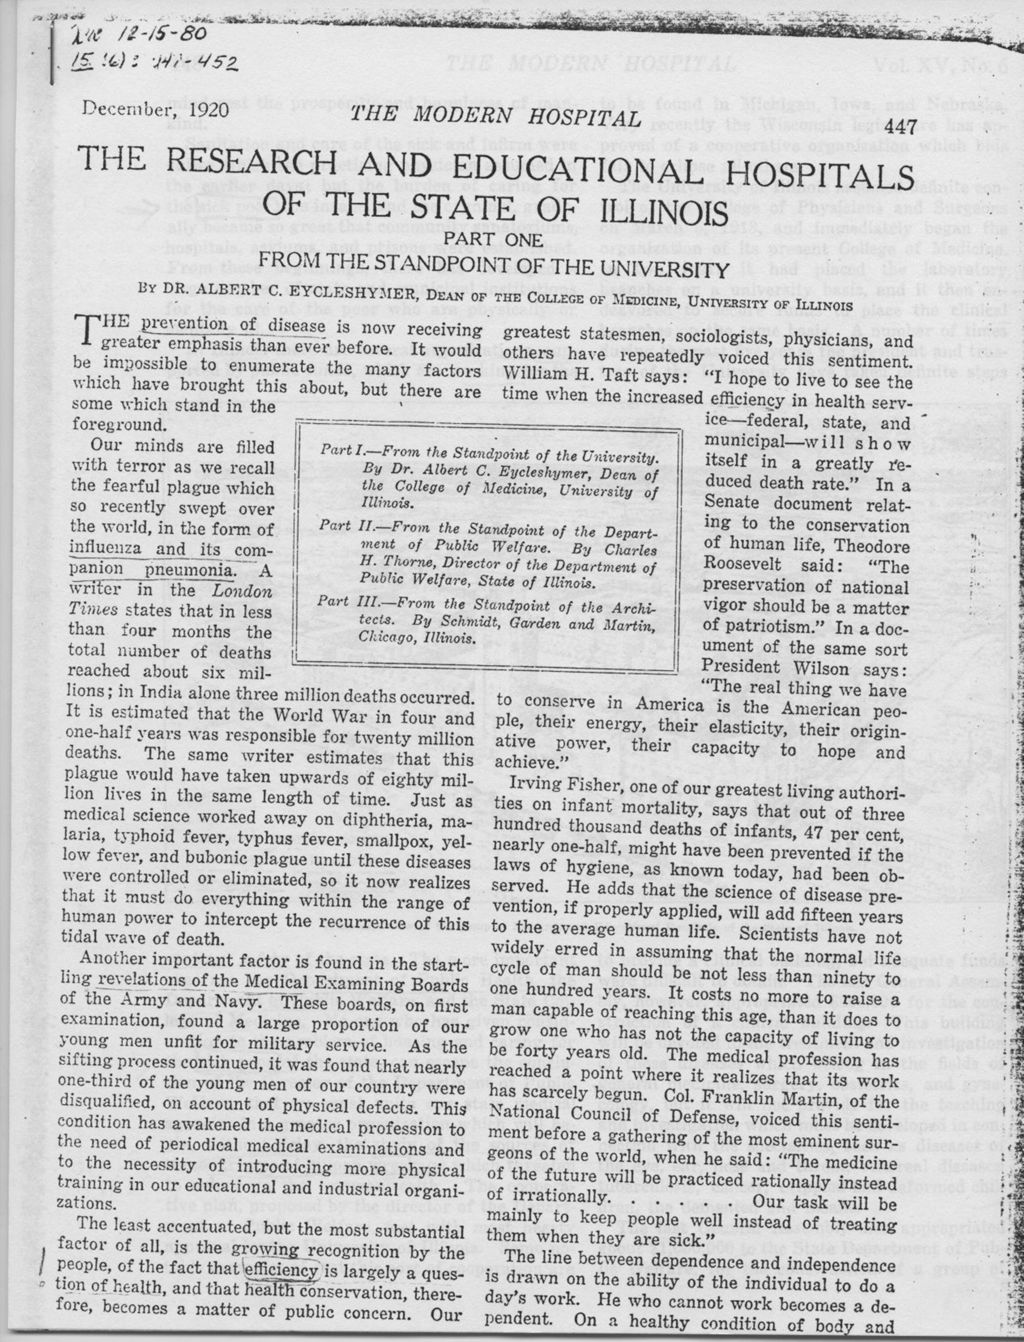 The Research and Educational Hospitals of the State of Illinois, Parts One, Two and Three